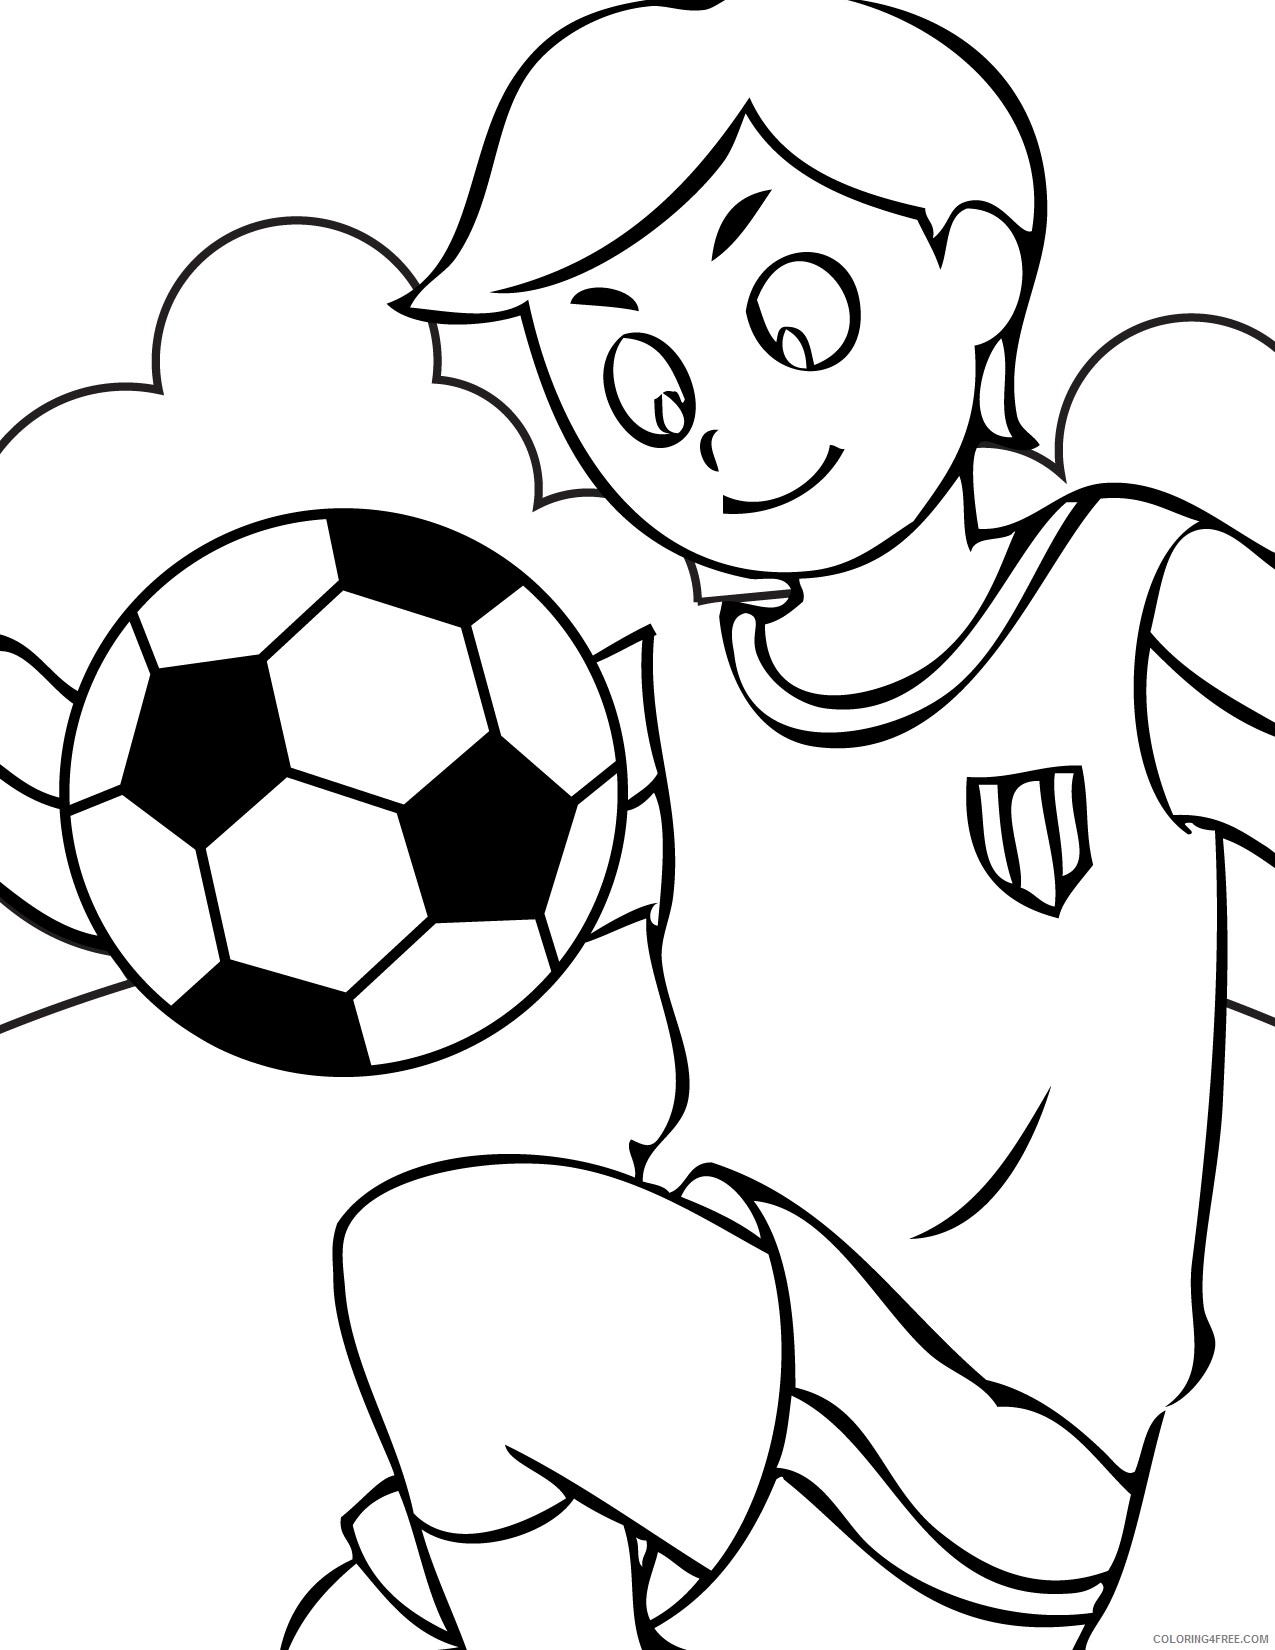 soccer coloring pages free printable Coloring4free